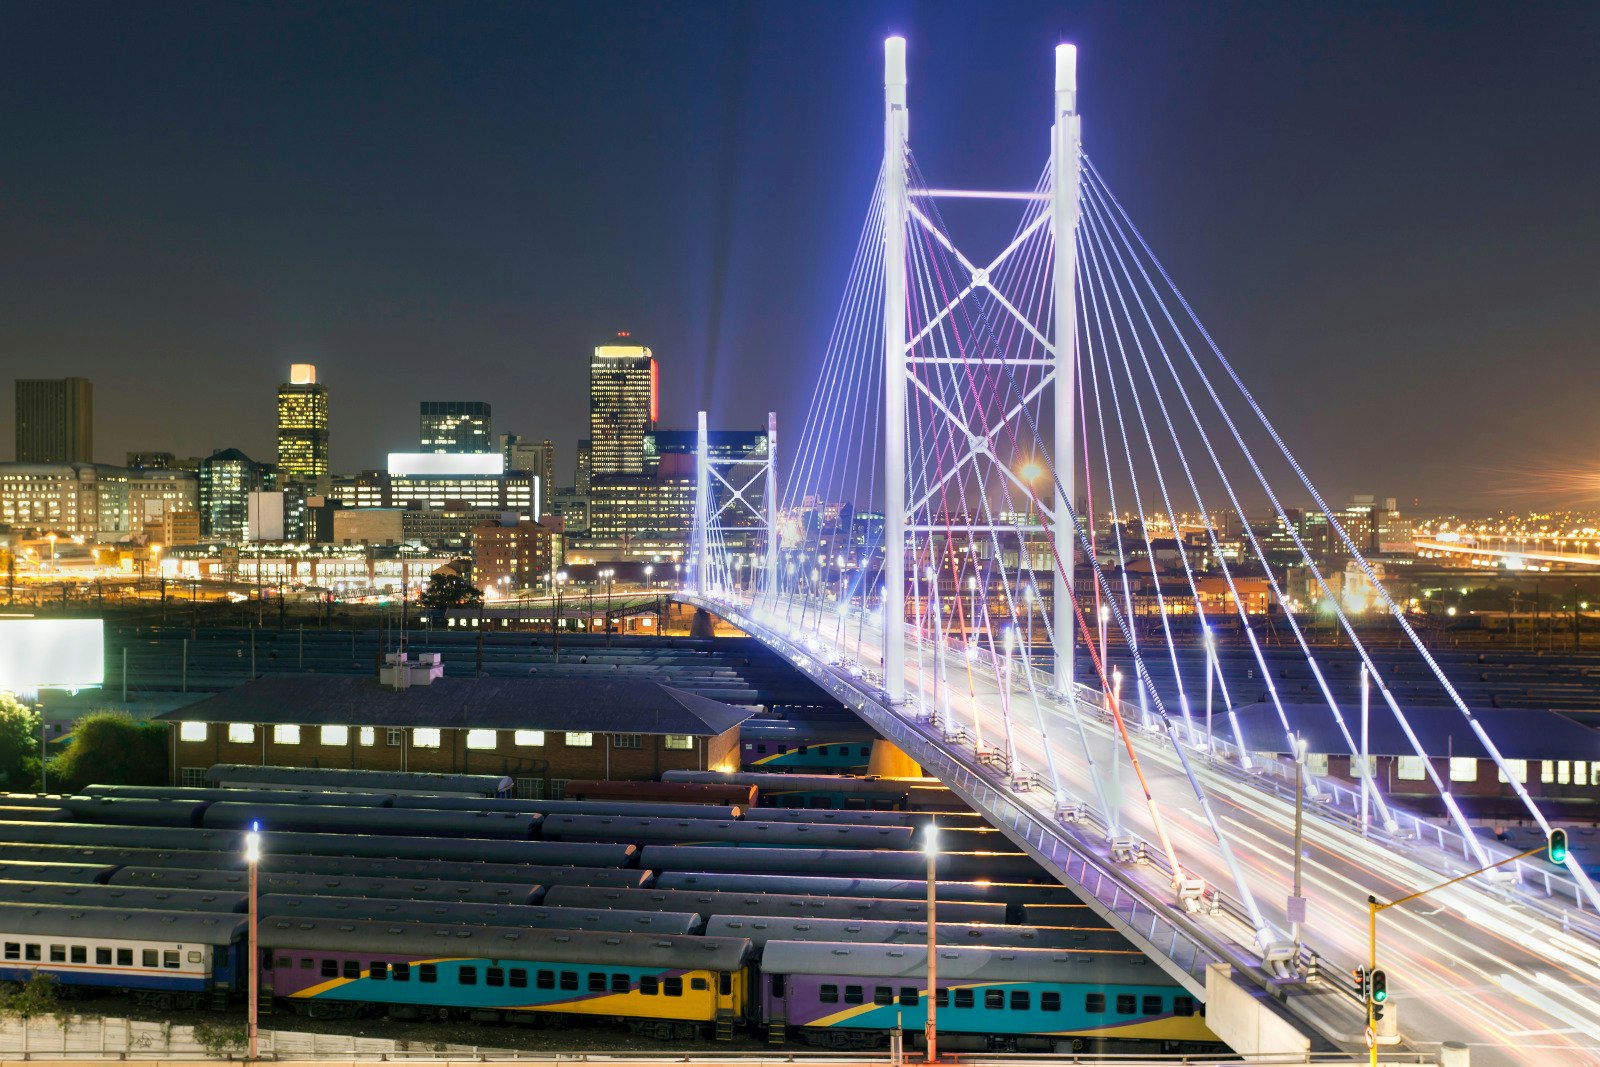 Stretching over eight rows of parked trains, the brilliantly lit white towers and cables of the Nelson Mandela Bridge stretch towards the skyline © Henrique NDR Martins / Getty Images 